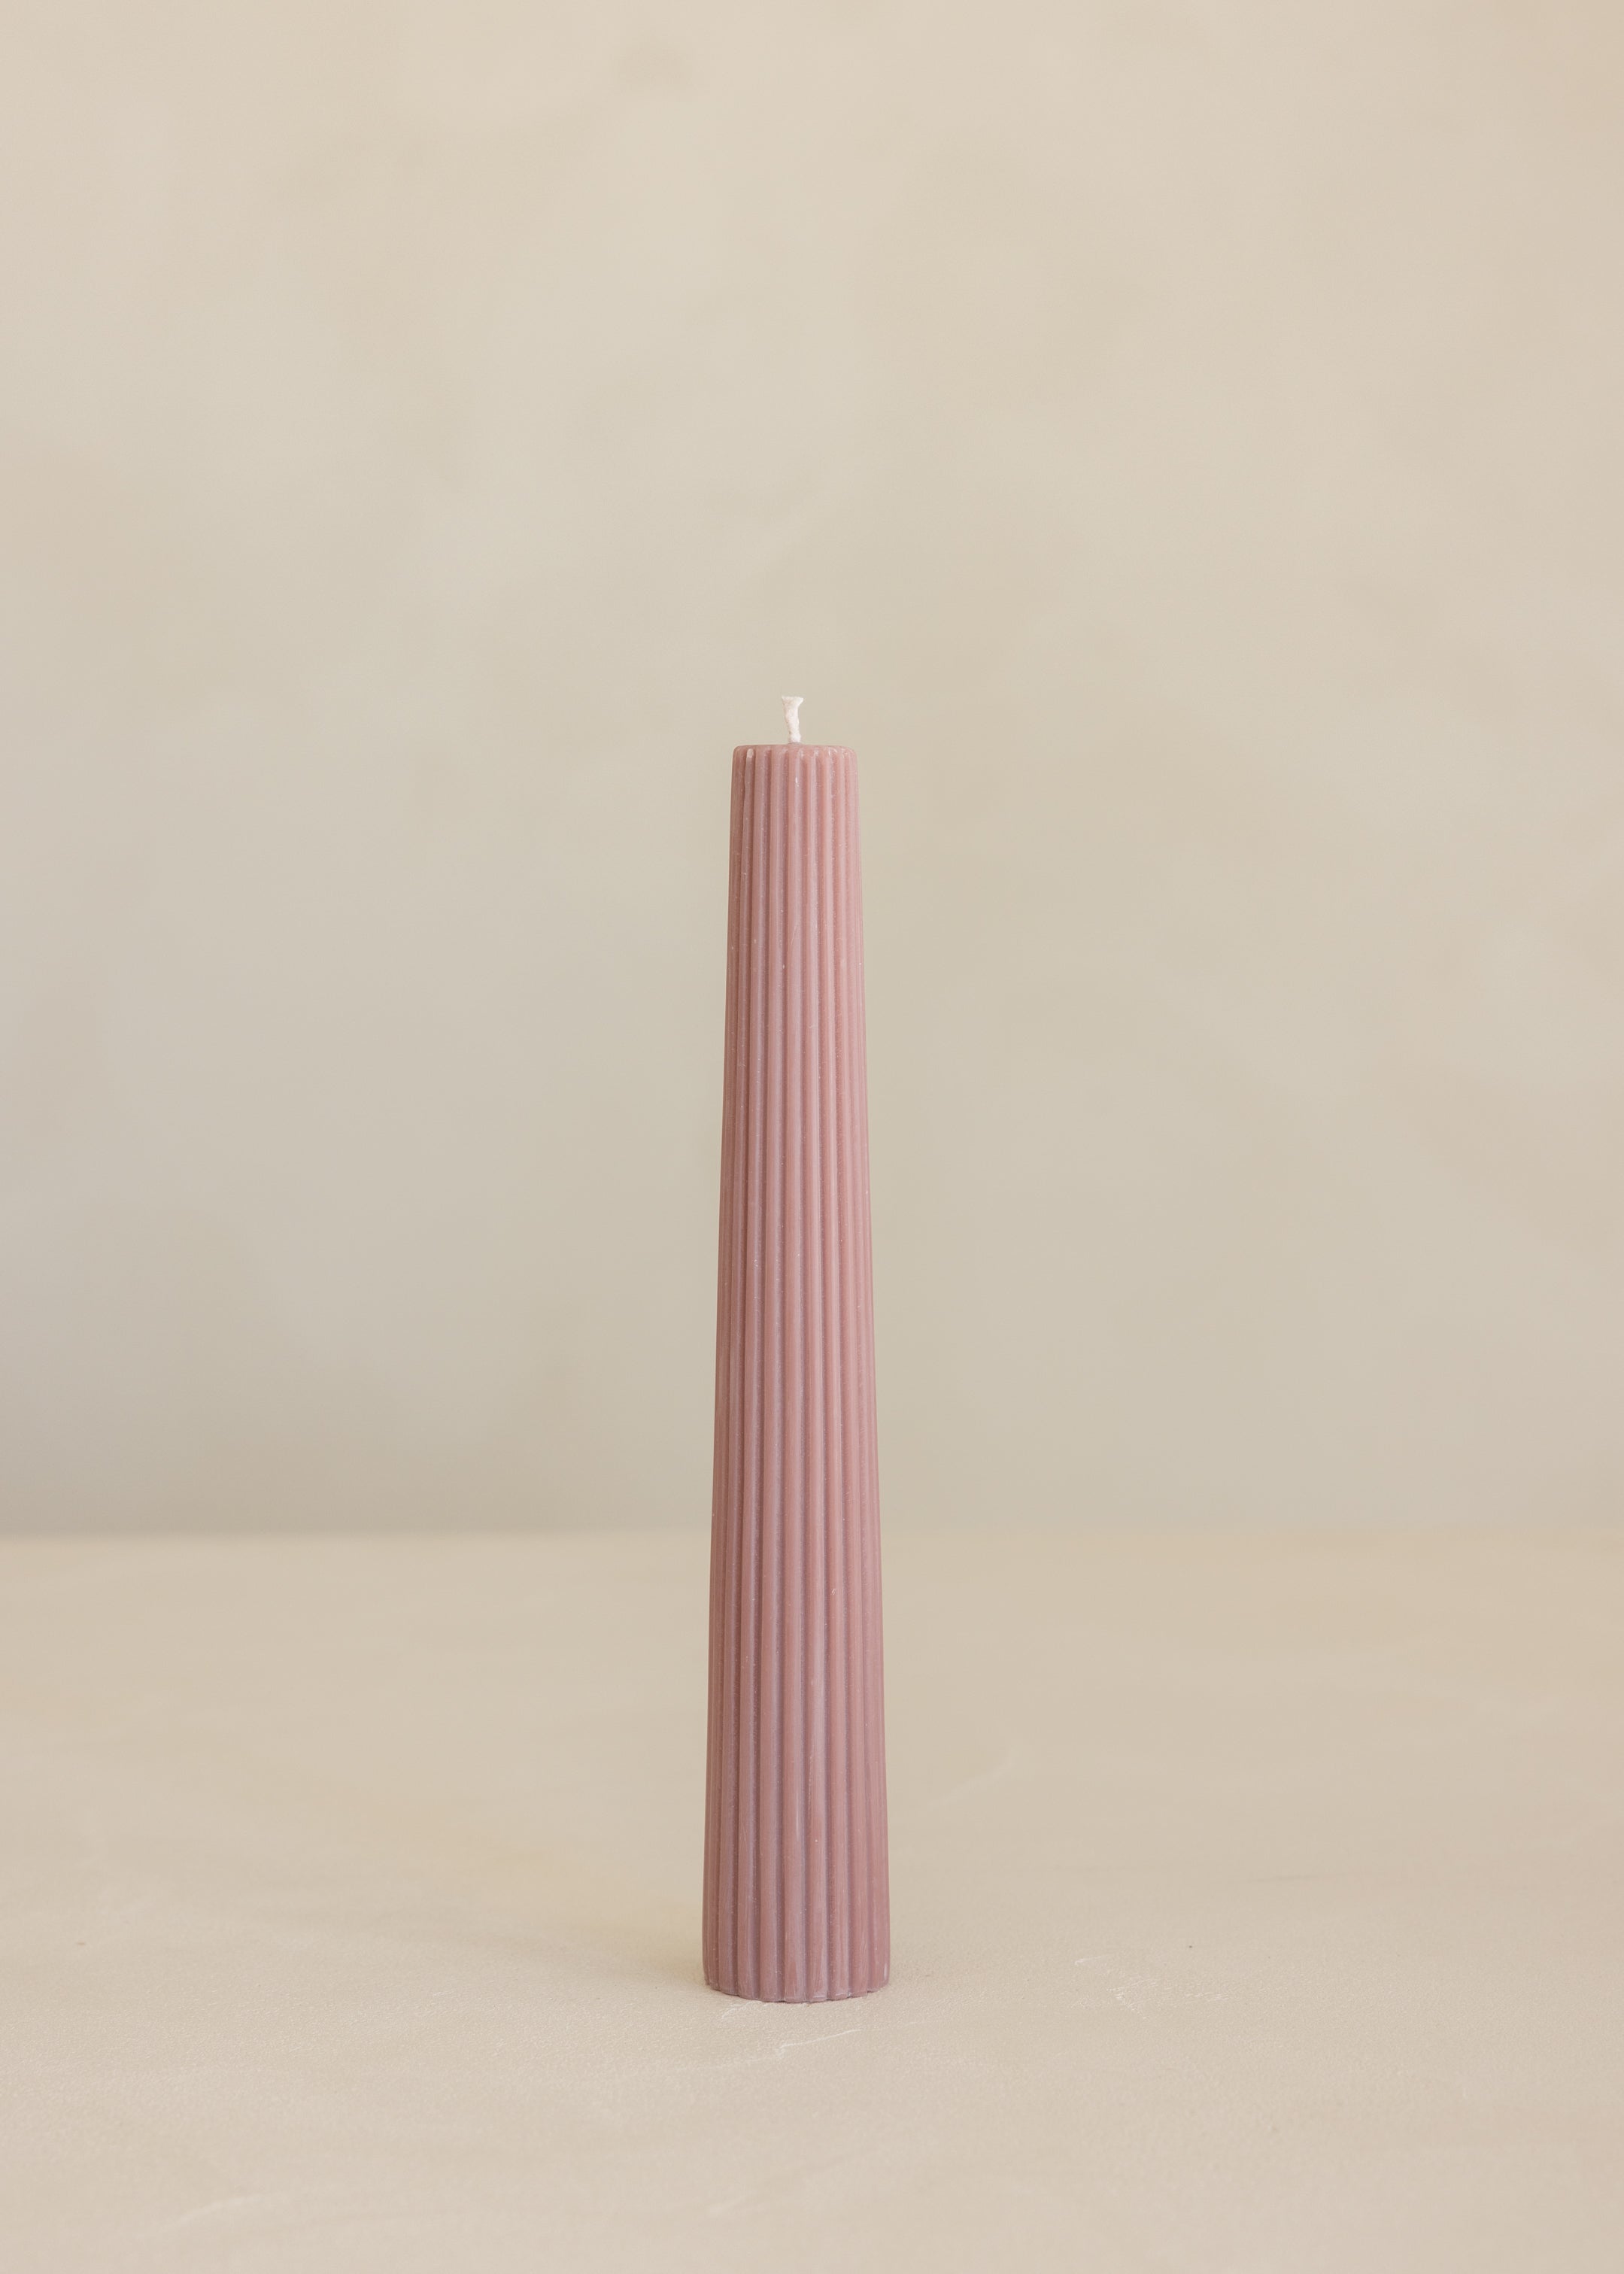 Tapered Lone Pillar Candle / Old Rose